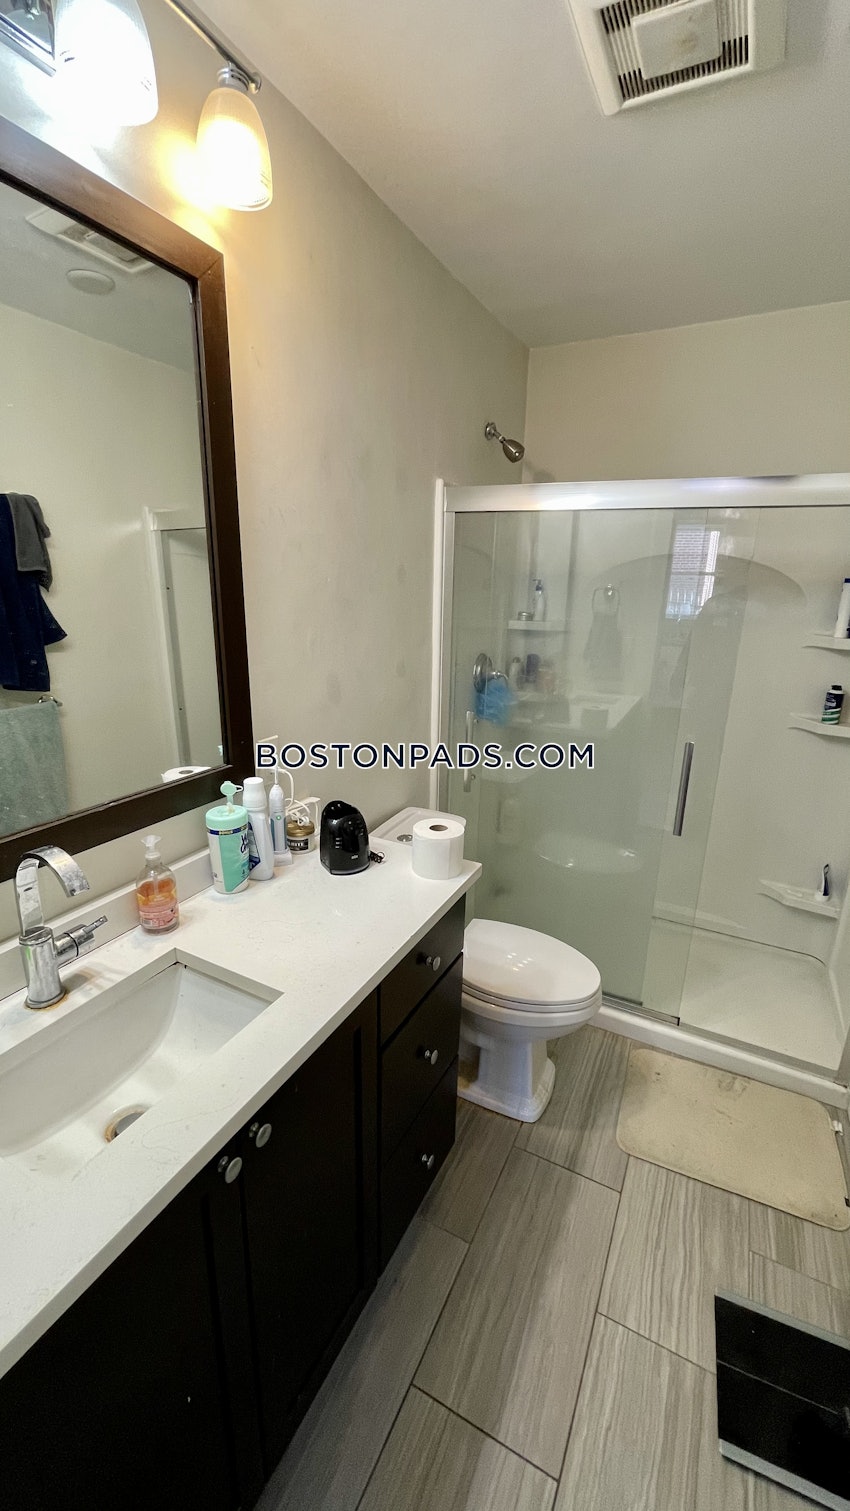 BOSTON - MISSION HILL - 5 Beds, 2 Baths - Image 14